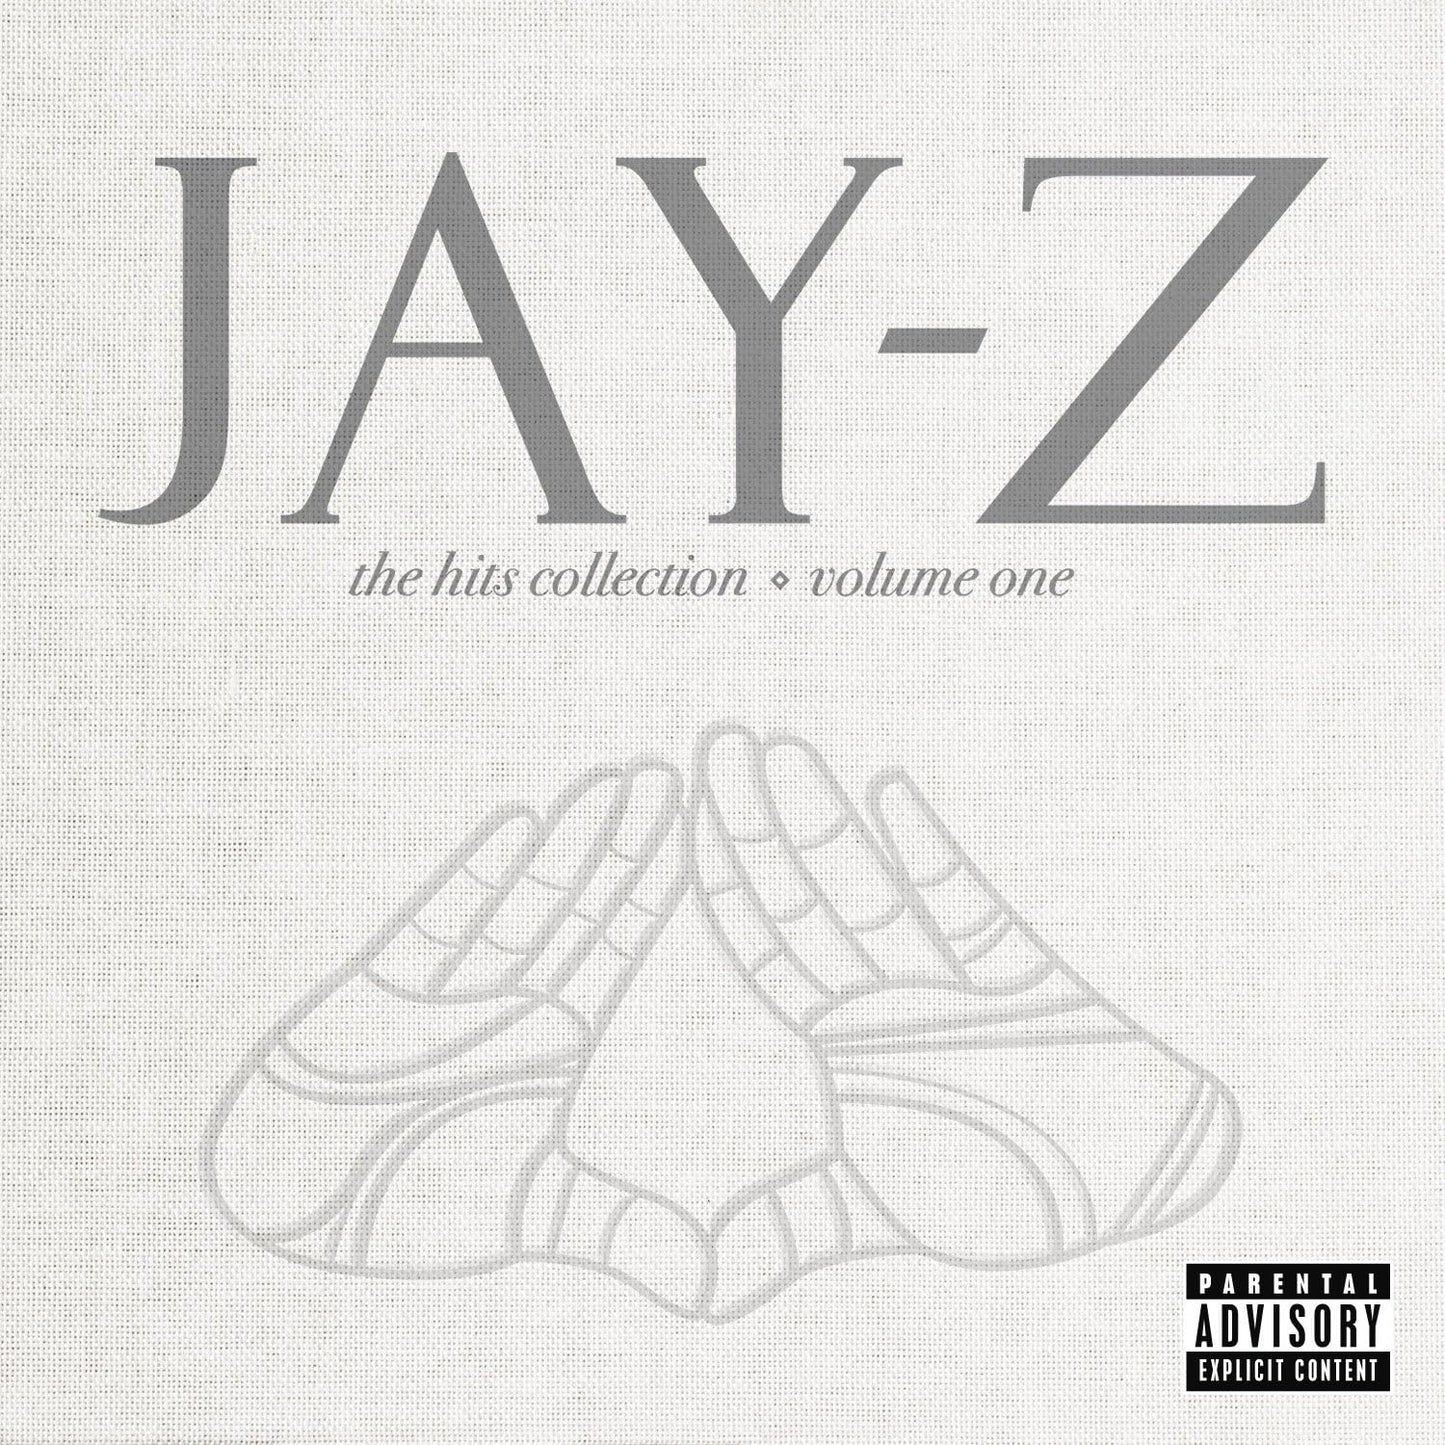 CD - Jay-Z - Hits Collection Volume 1